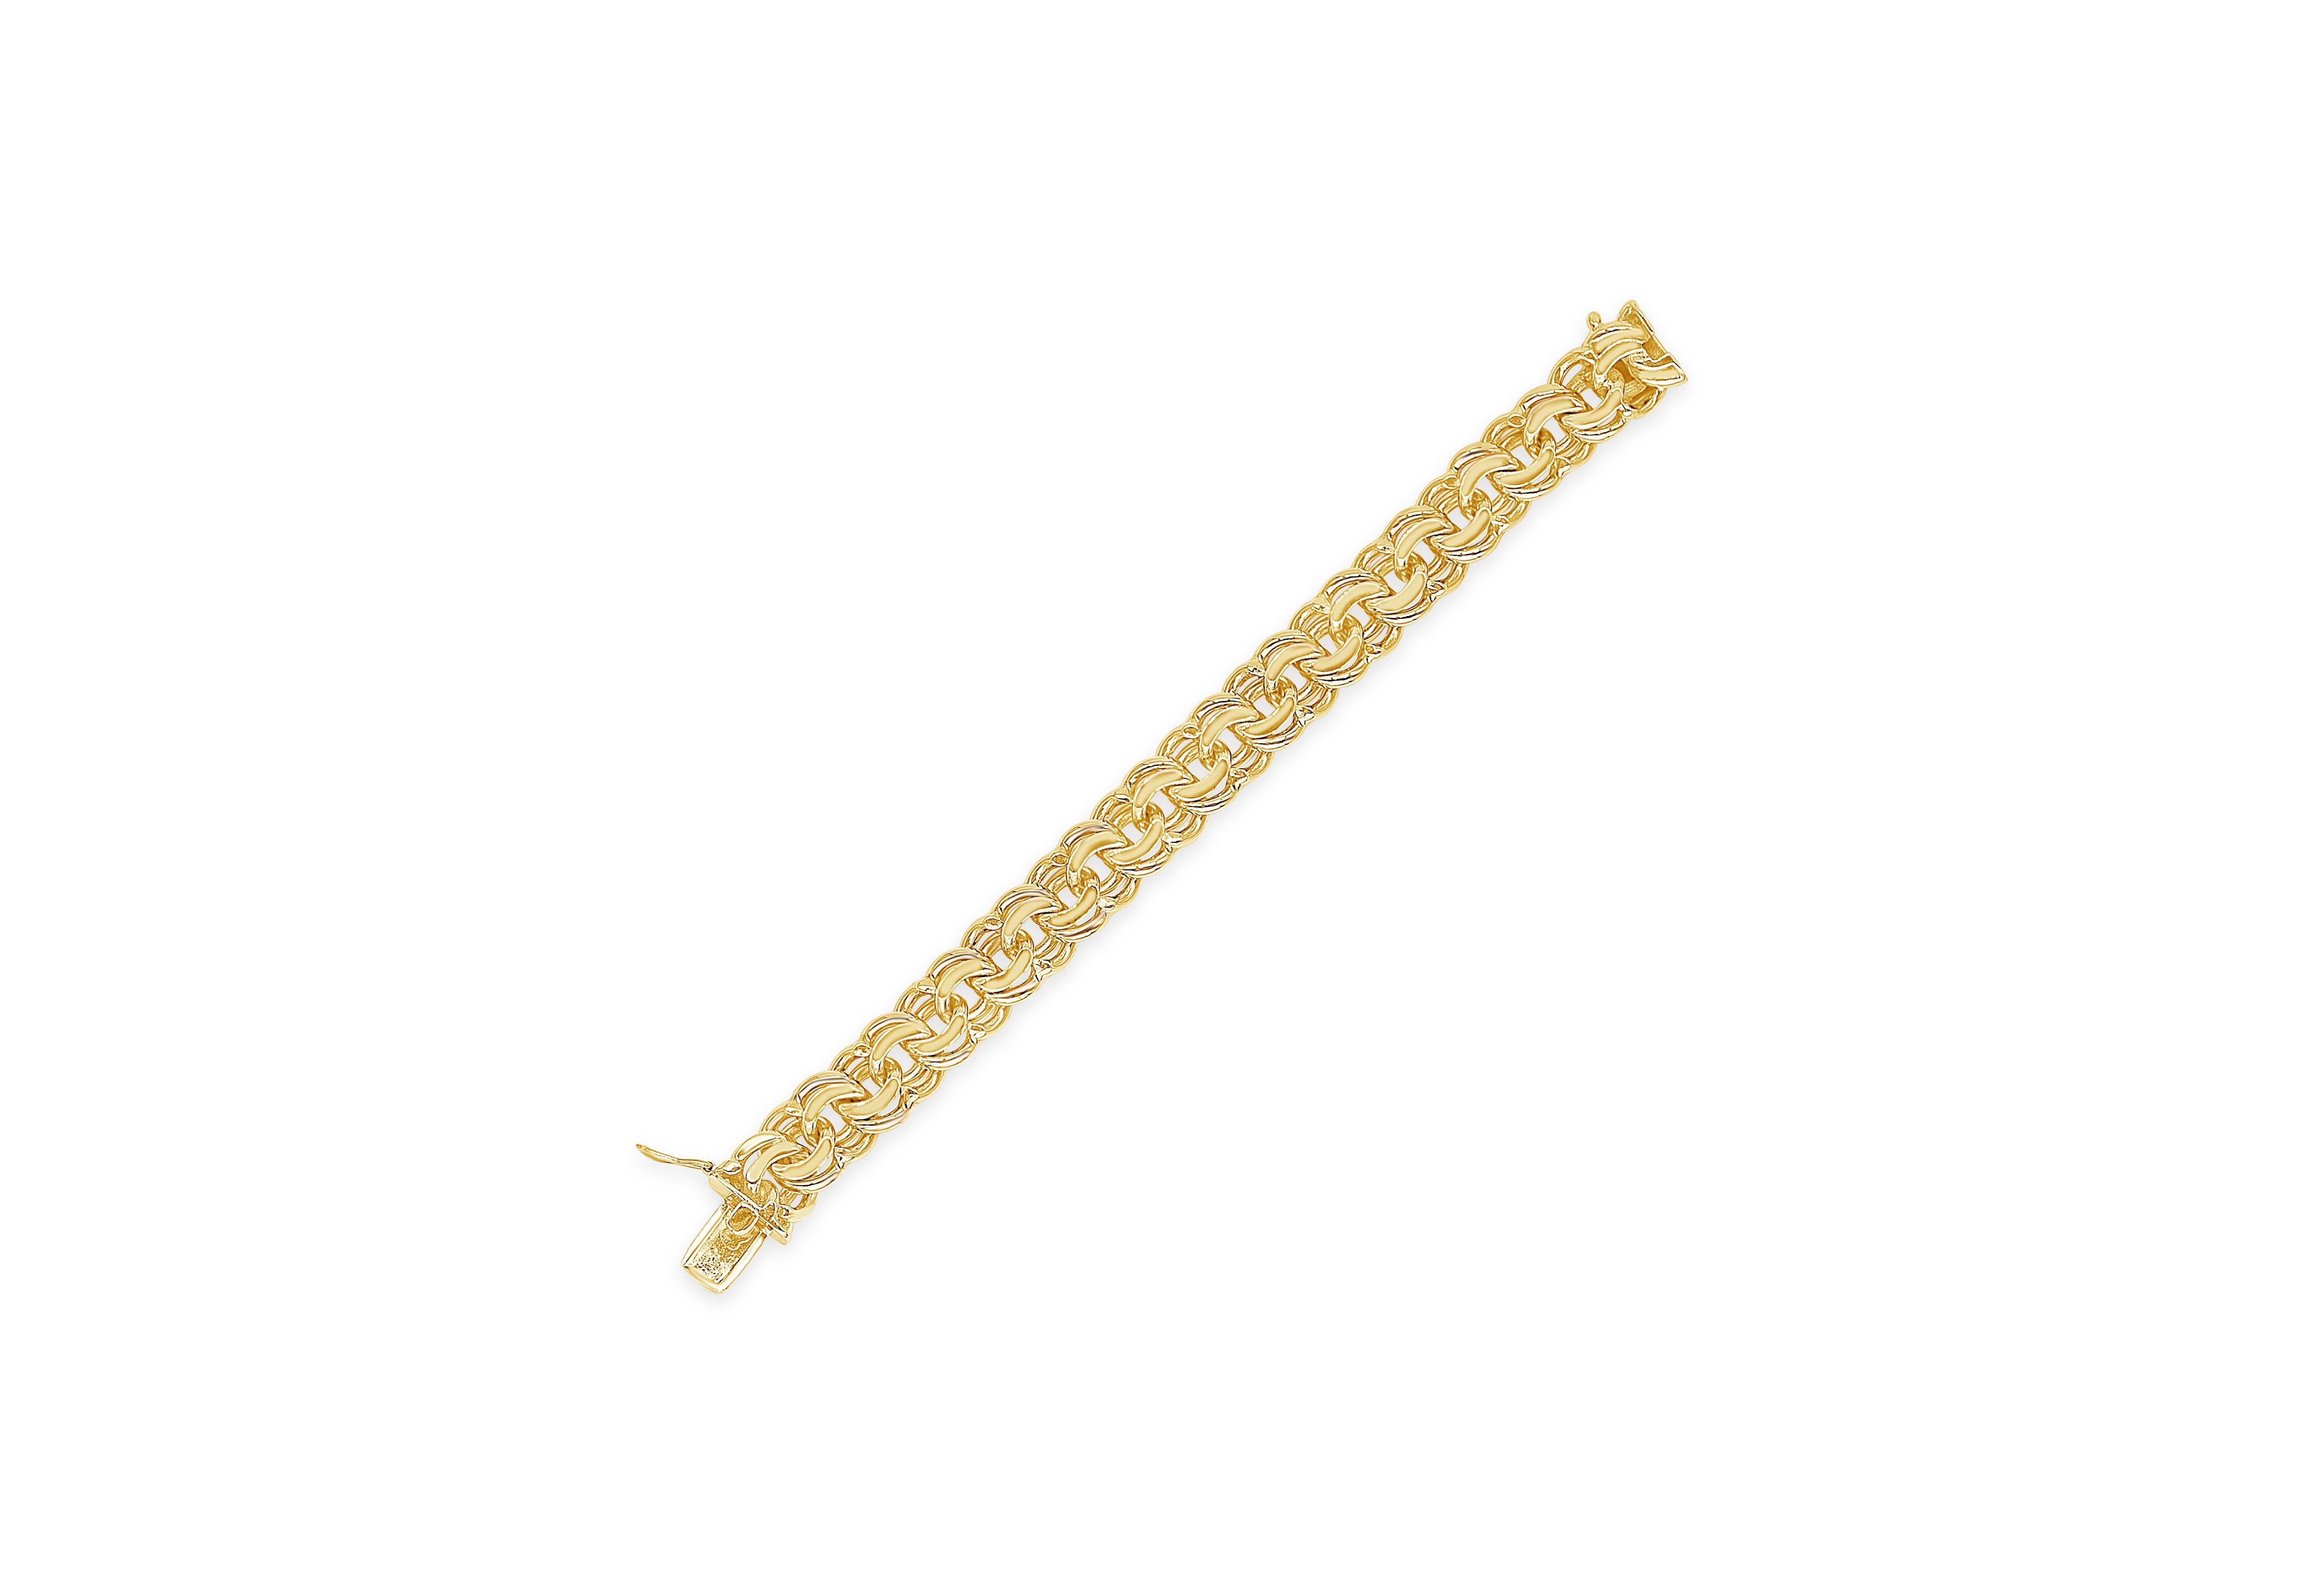 A simple bracelet of intertwined links made of 14K yellow gold, featuring a looping design. This bracelet weighs 69.15 grams, and it measures 7.25 inches in length and 0.53 inches in width.



